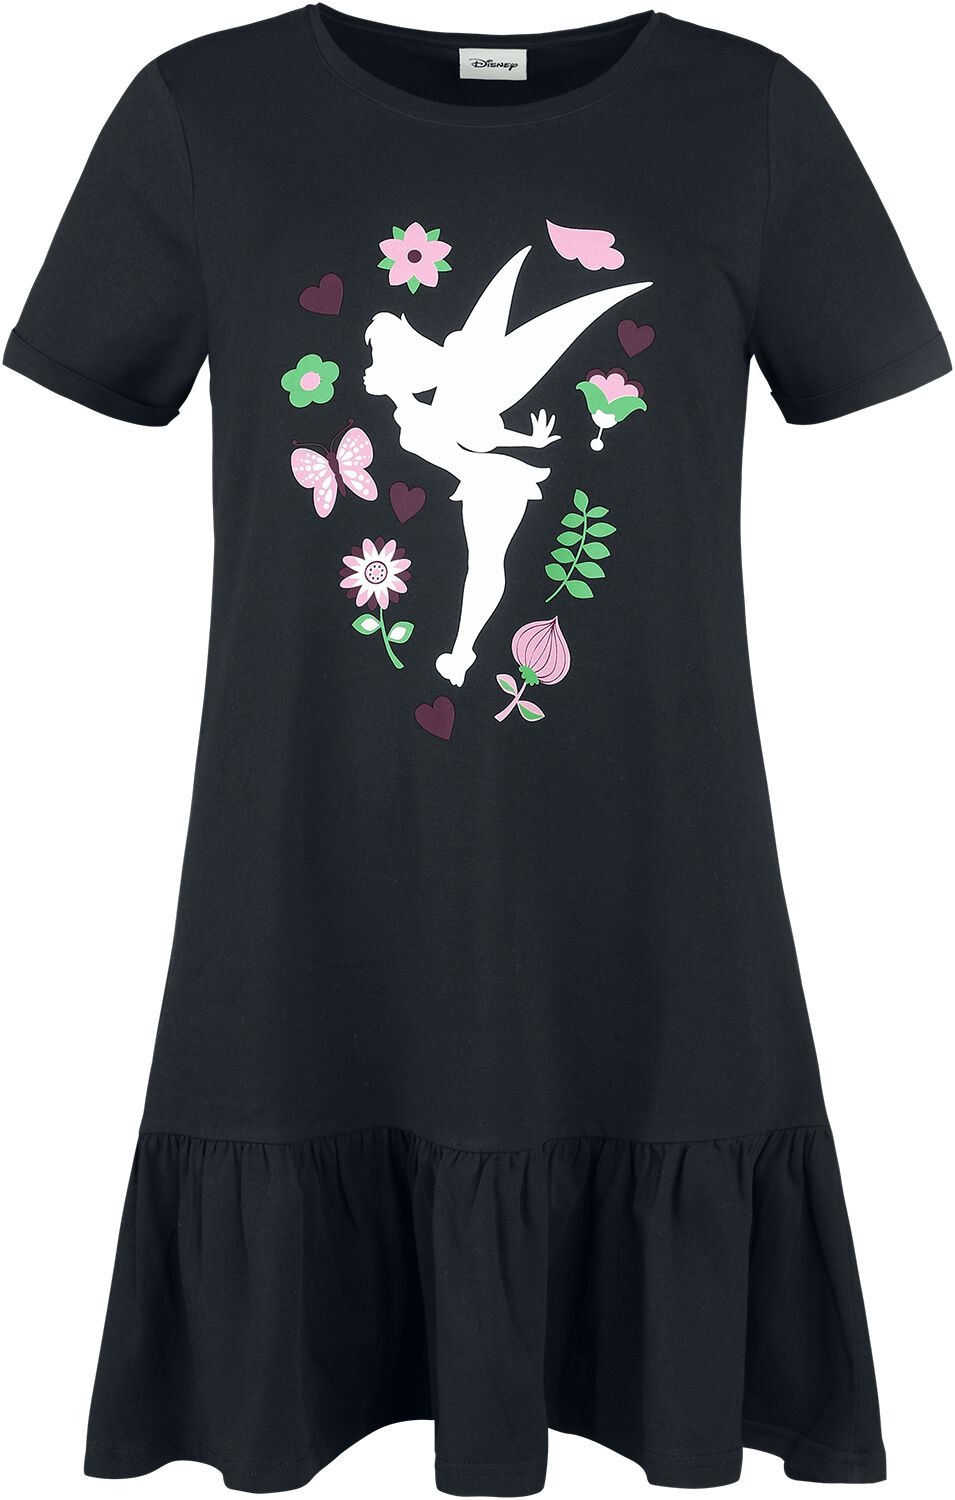 Image of Abito lungo Disney di Peter Pan - Tinker Bell - Flower - S a L - Donna - nero